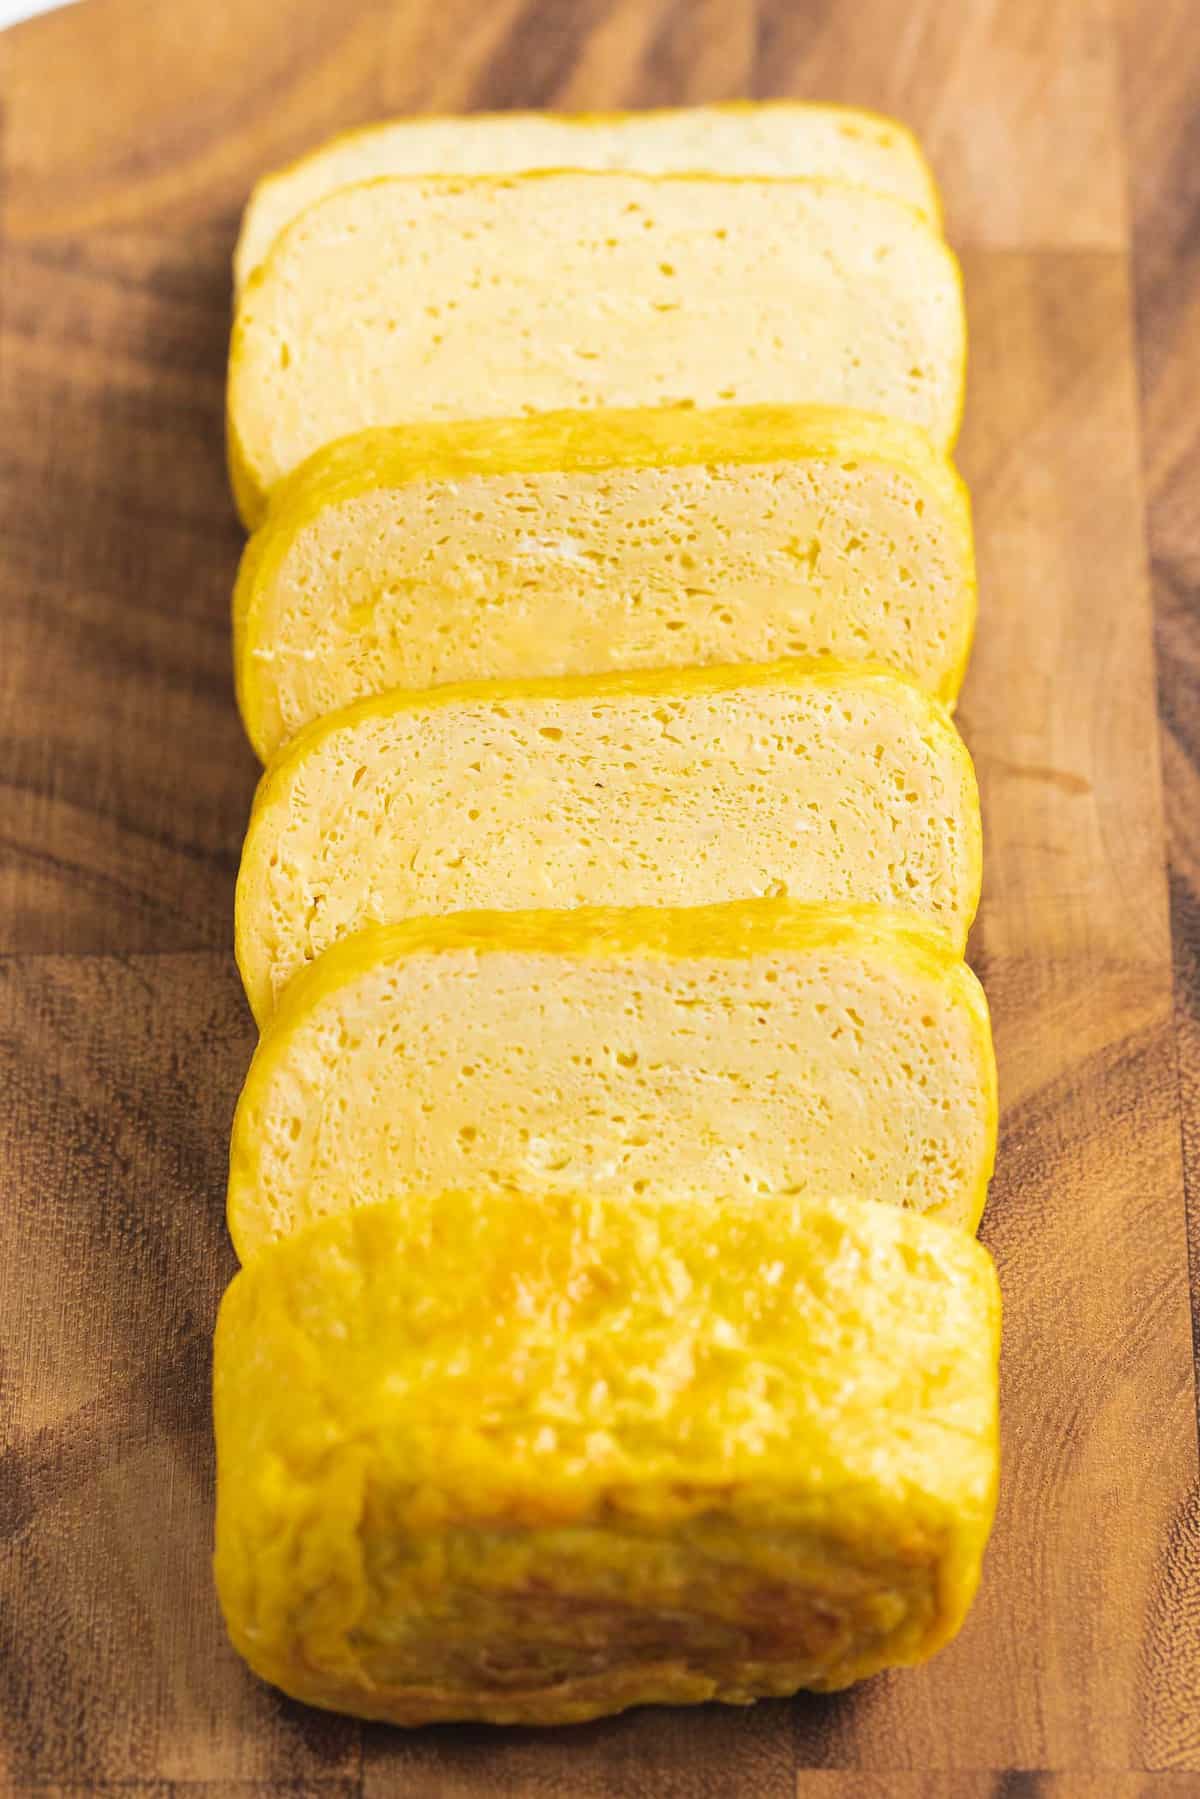 Tamagoyaki rolled omelet sliced on a wooden cutting board.